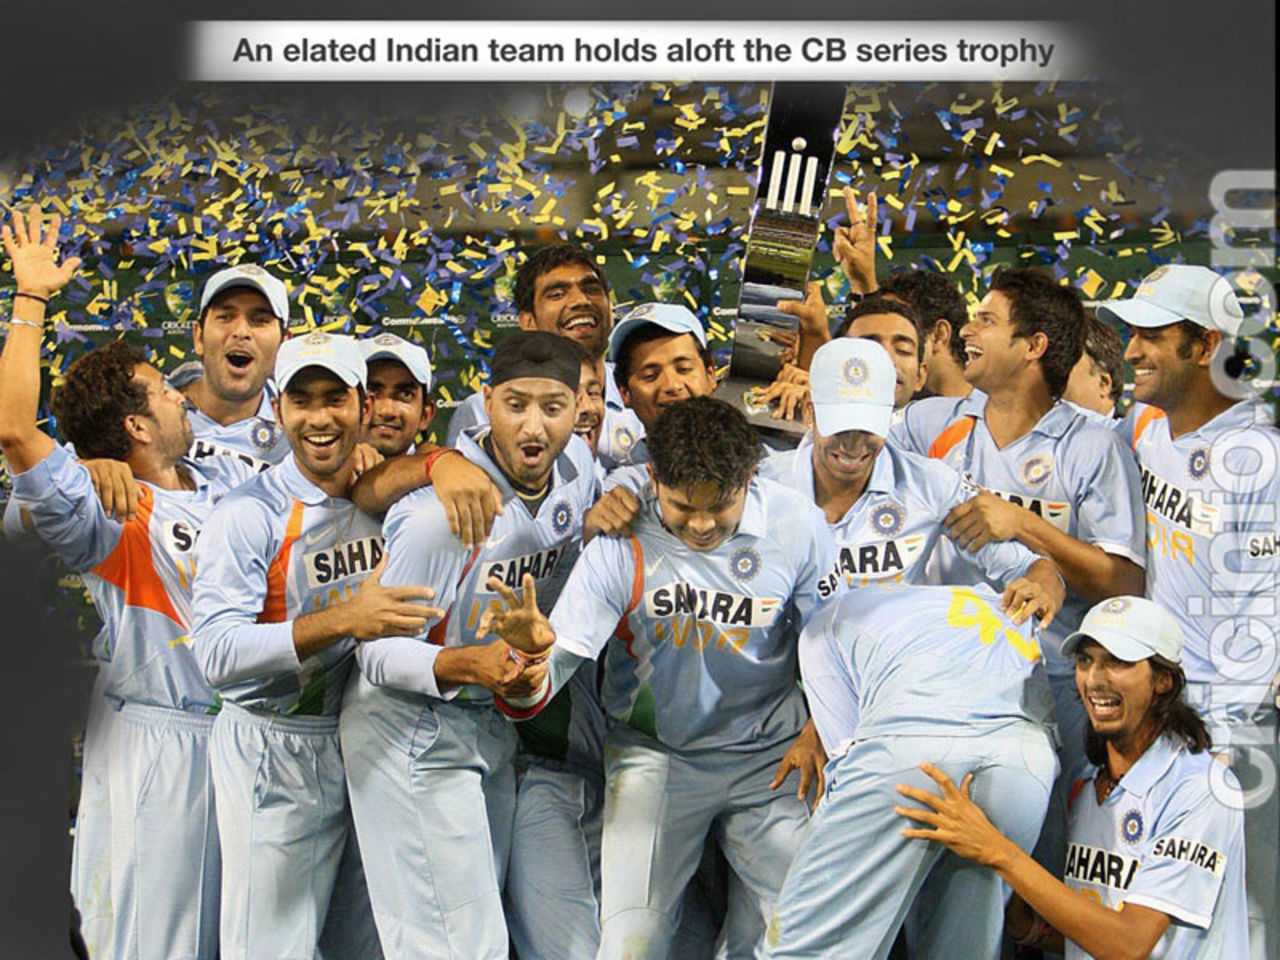 Indian Team with the CB series trophy